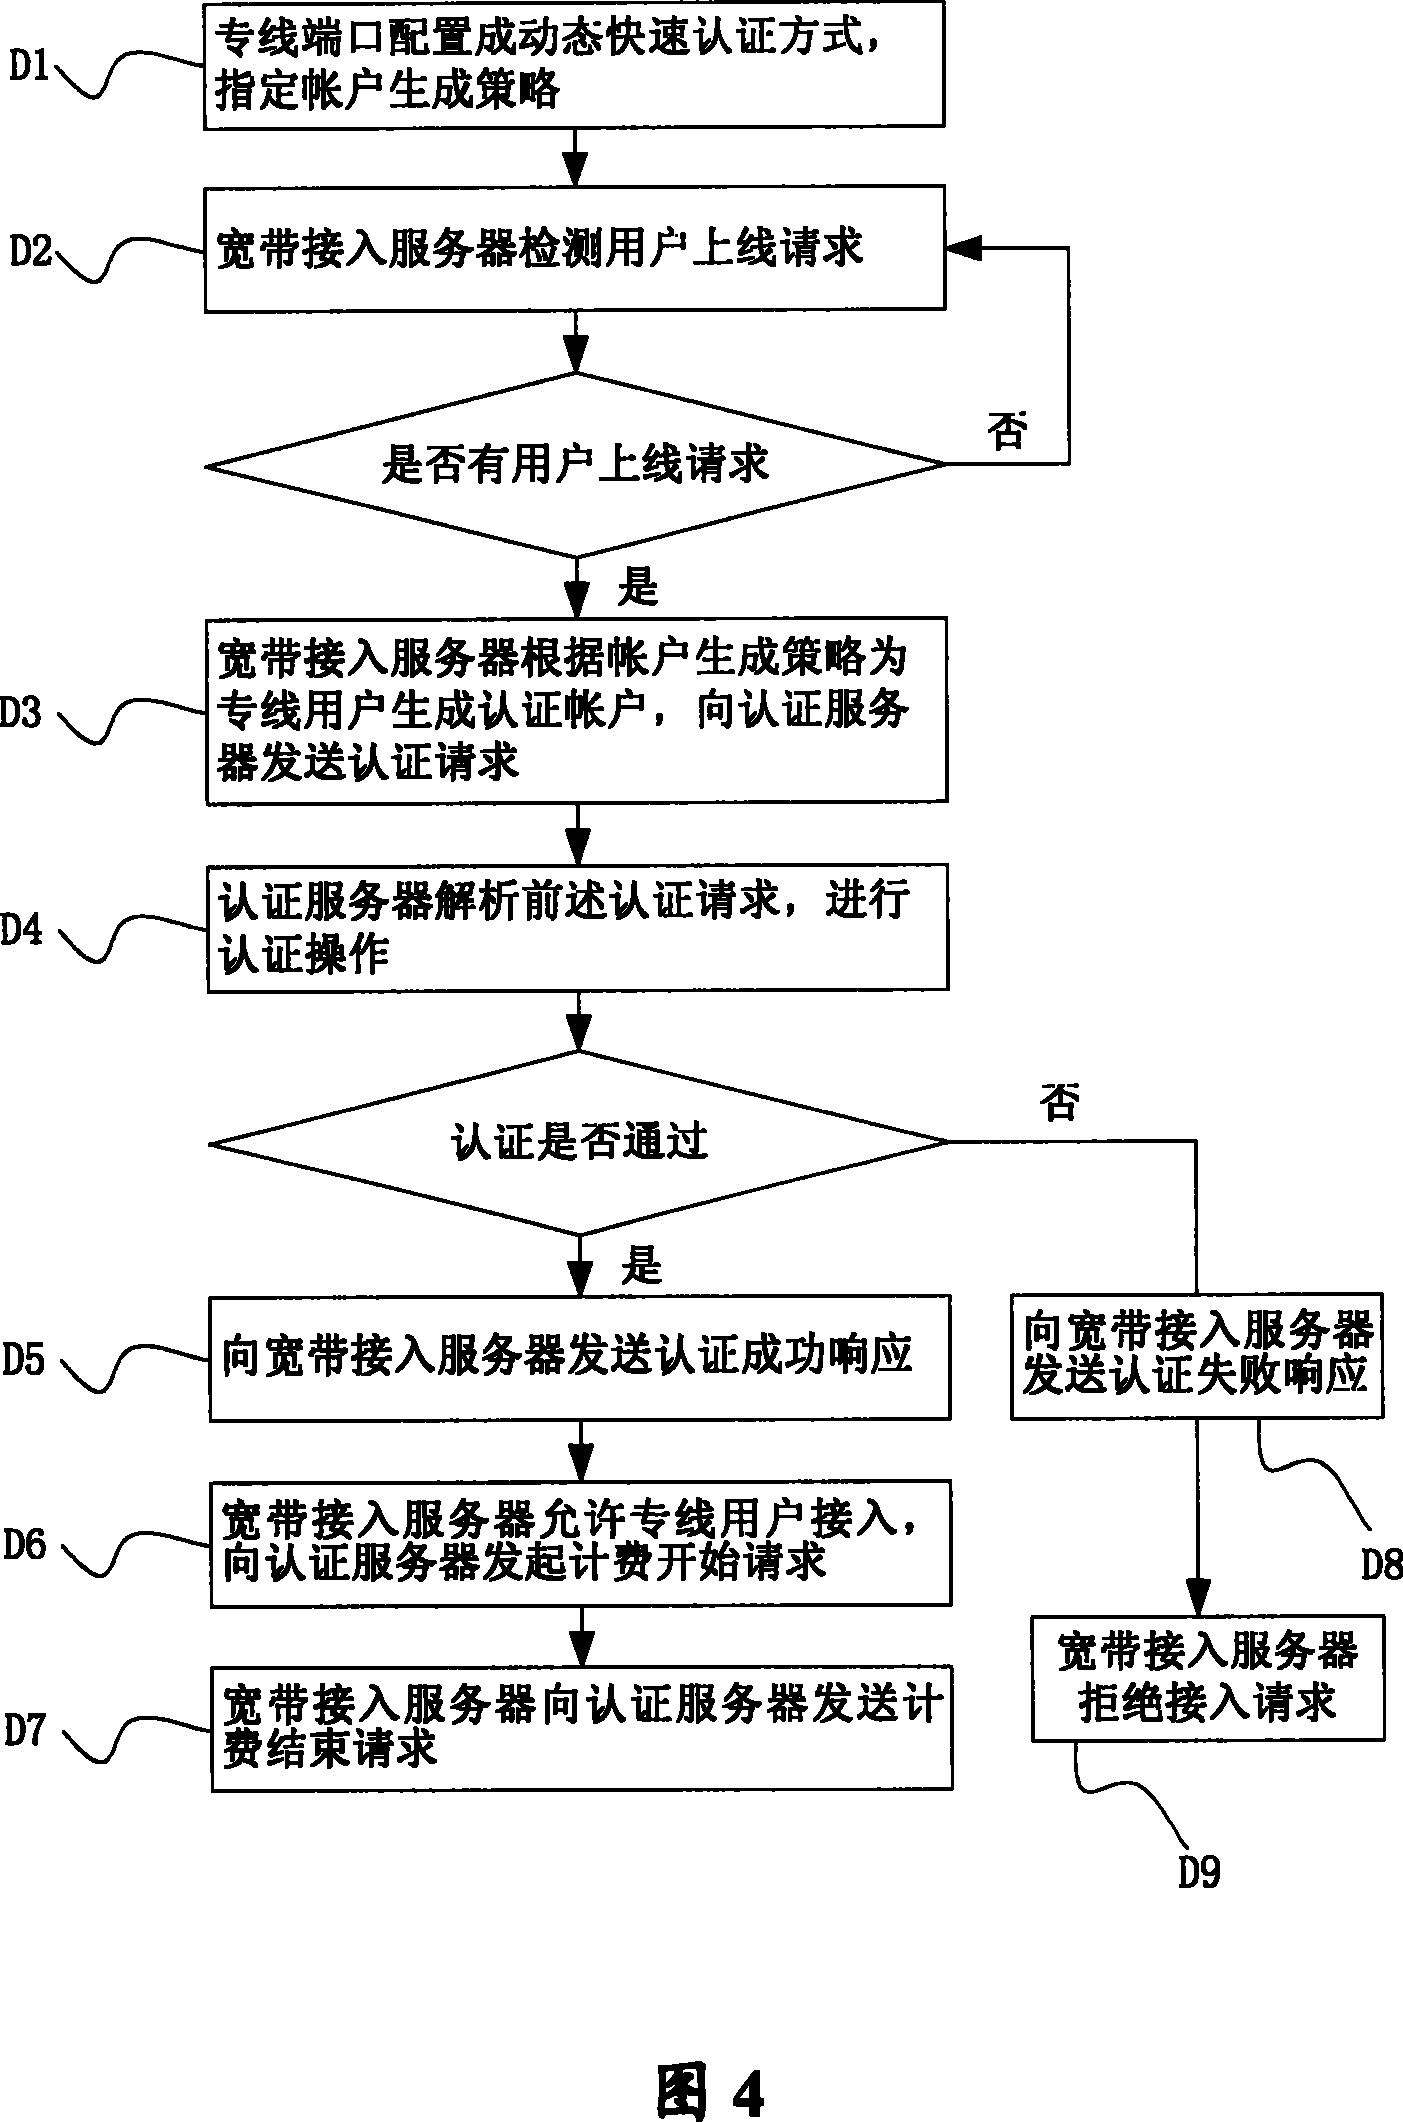 Method for realizing user authentication of wide-band network special bus